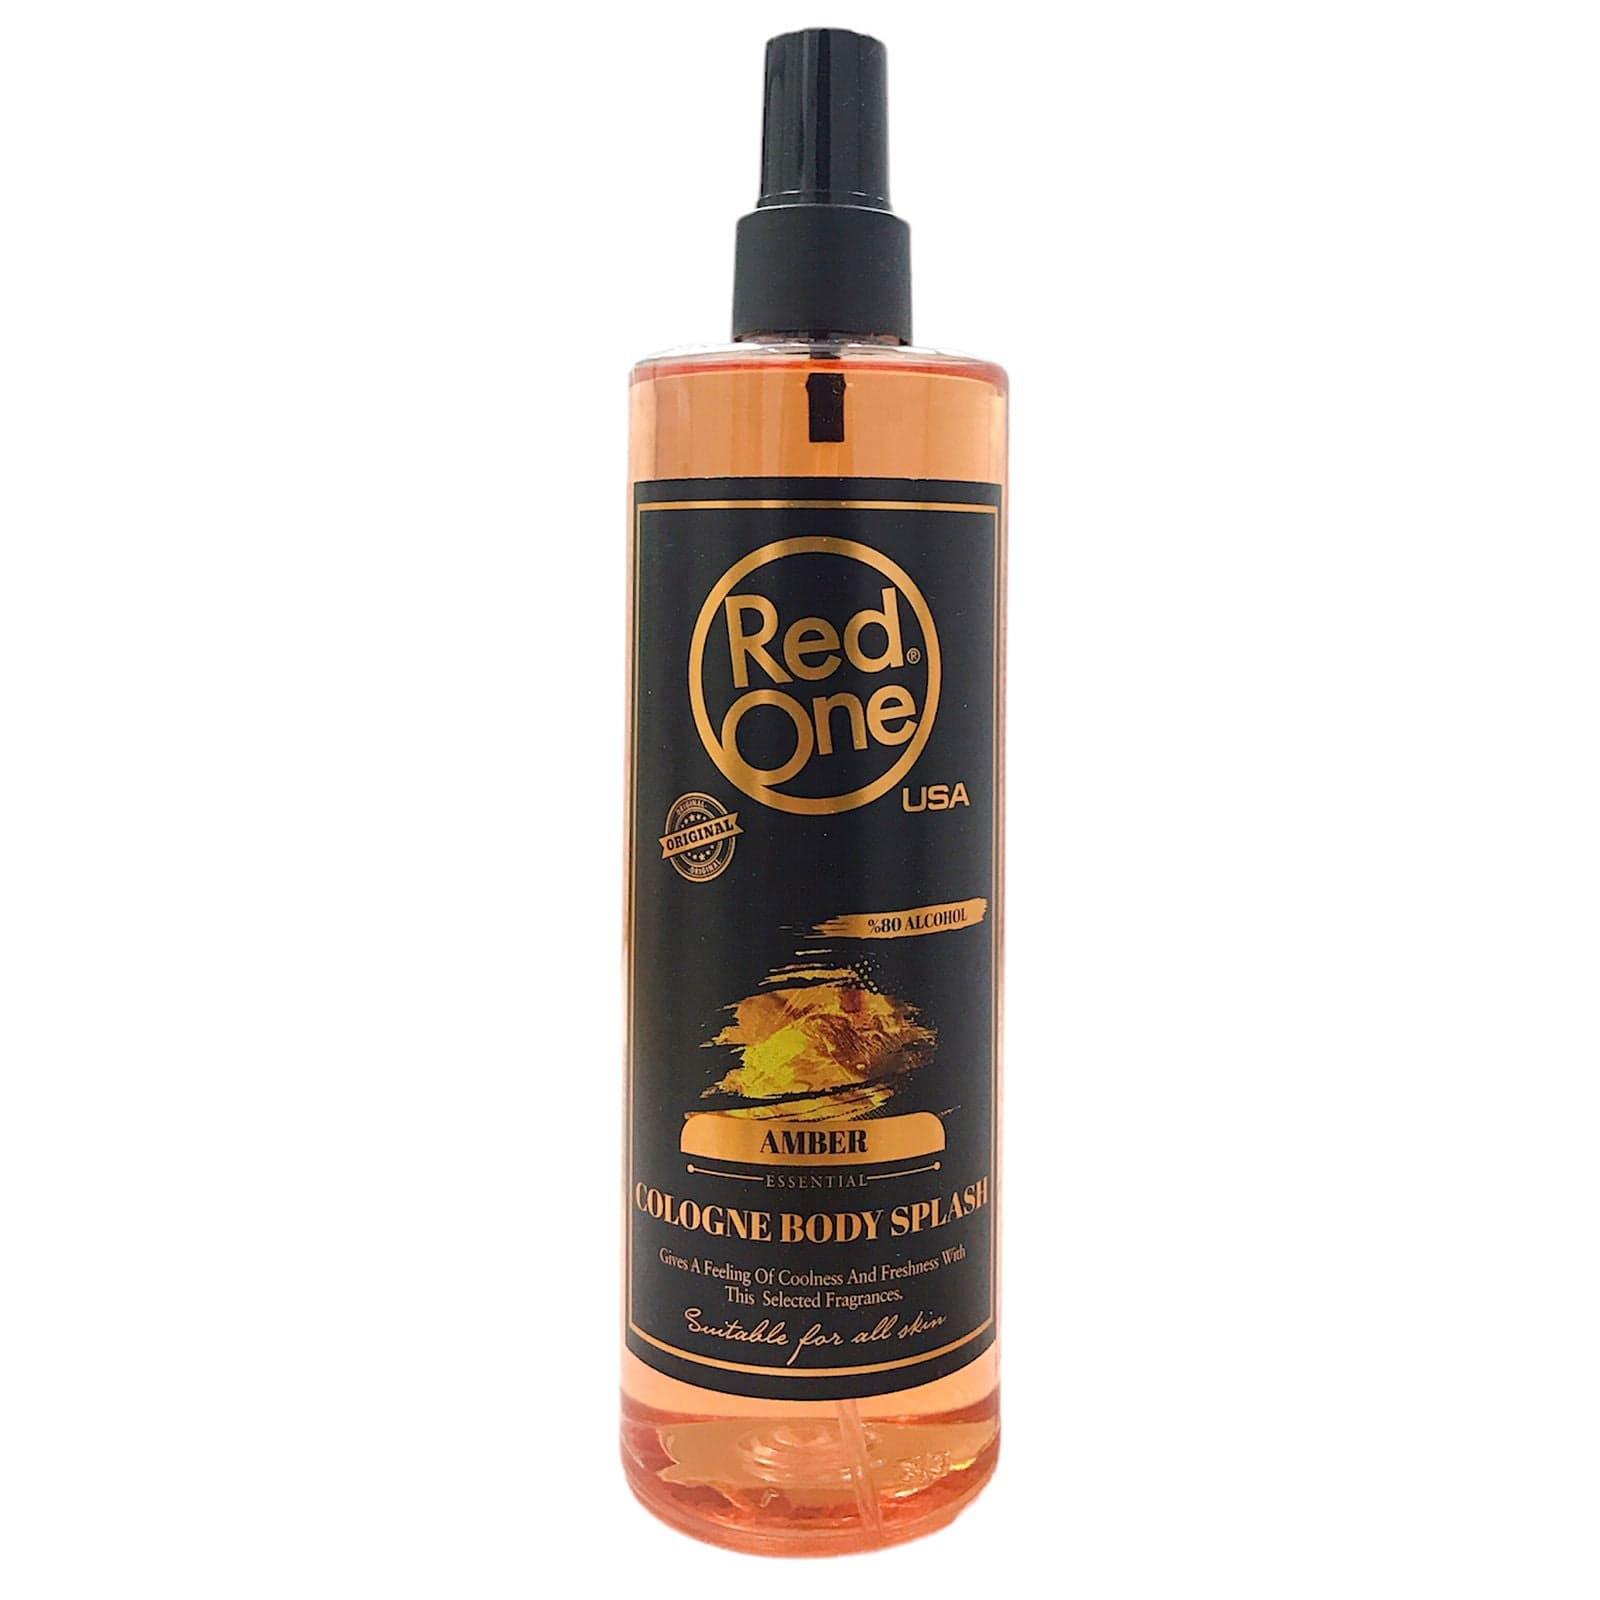 RedOne After Shave Cologne Body Splash Amber 400ml